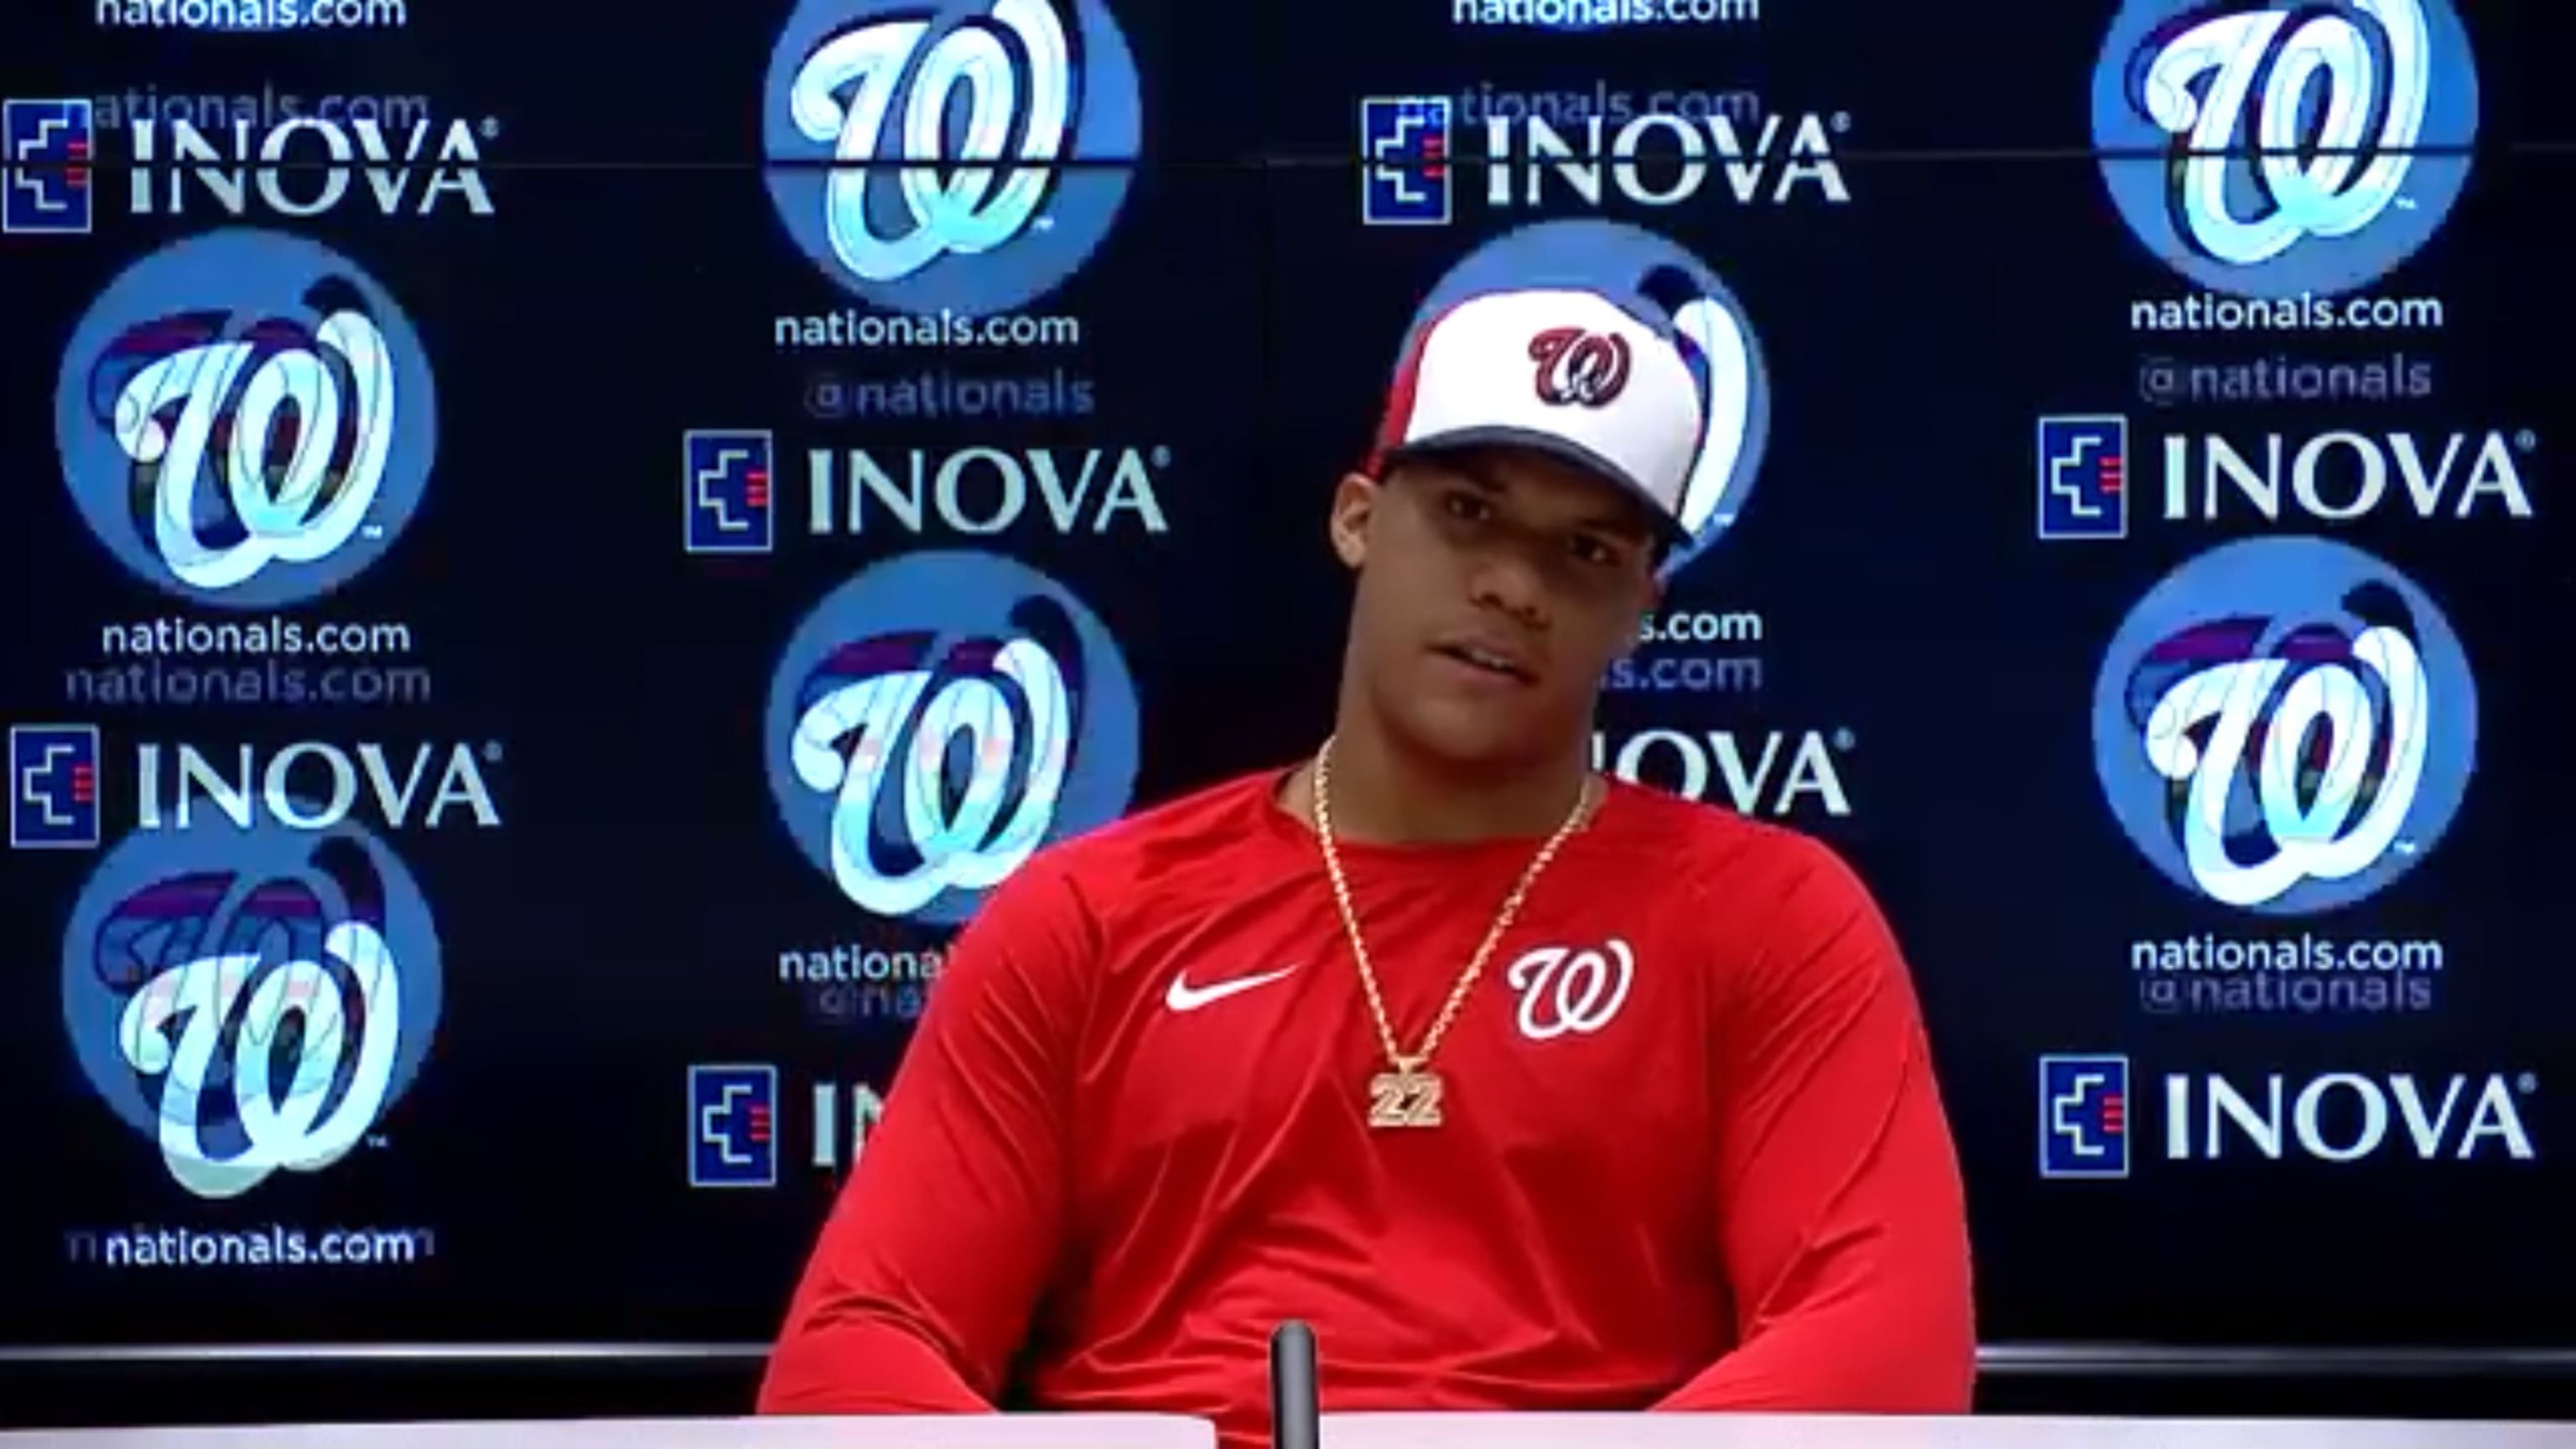 Nationals' Juan Soto becomes youngest player to win NL batting title